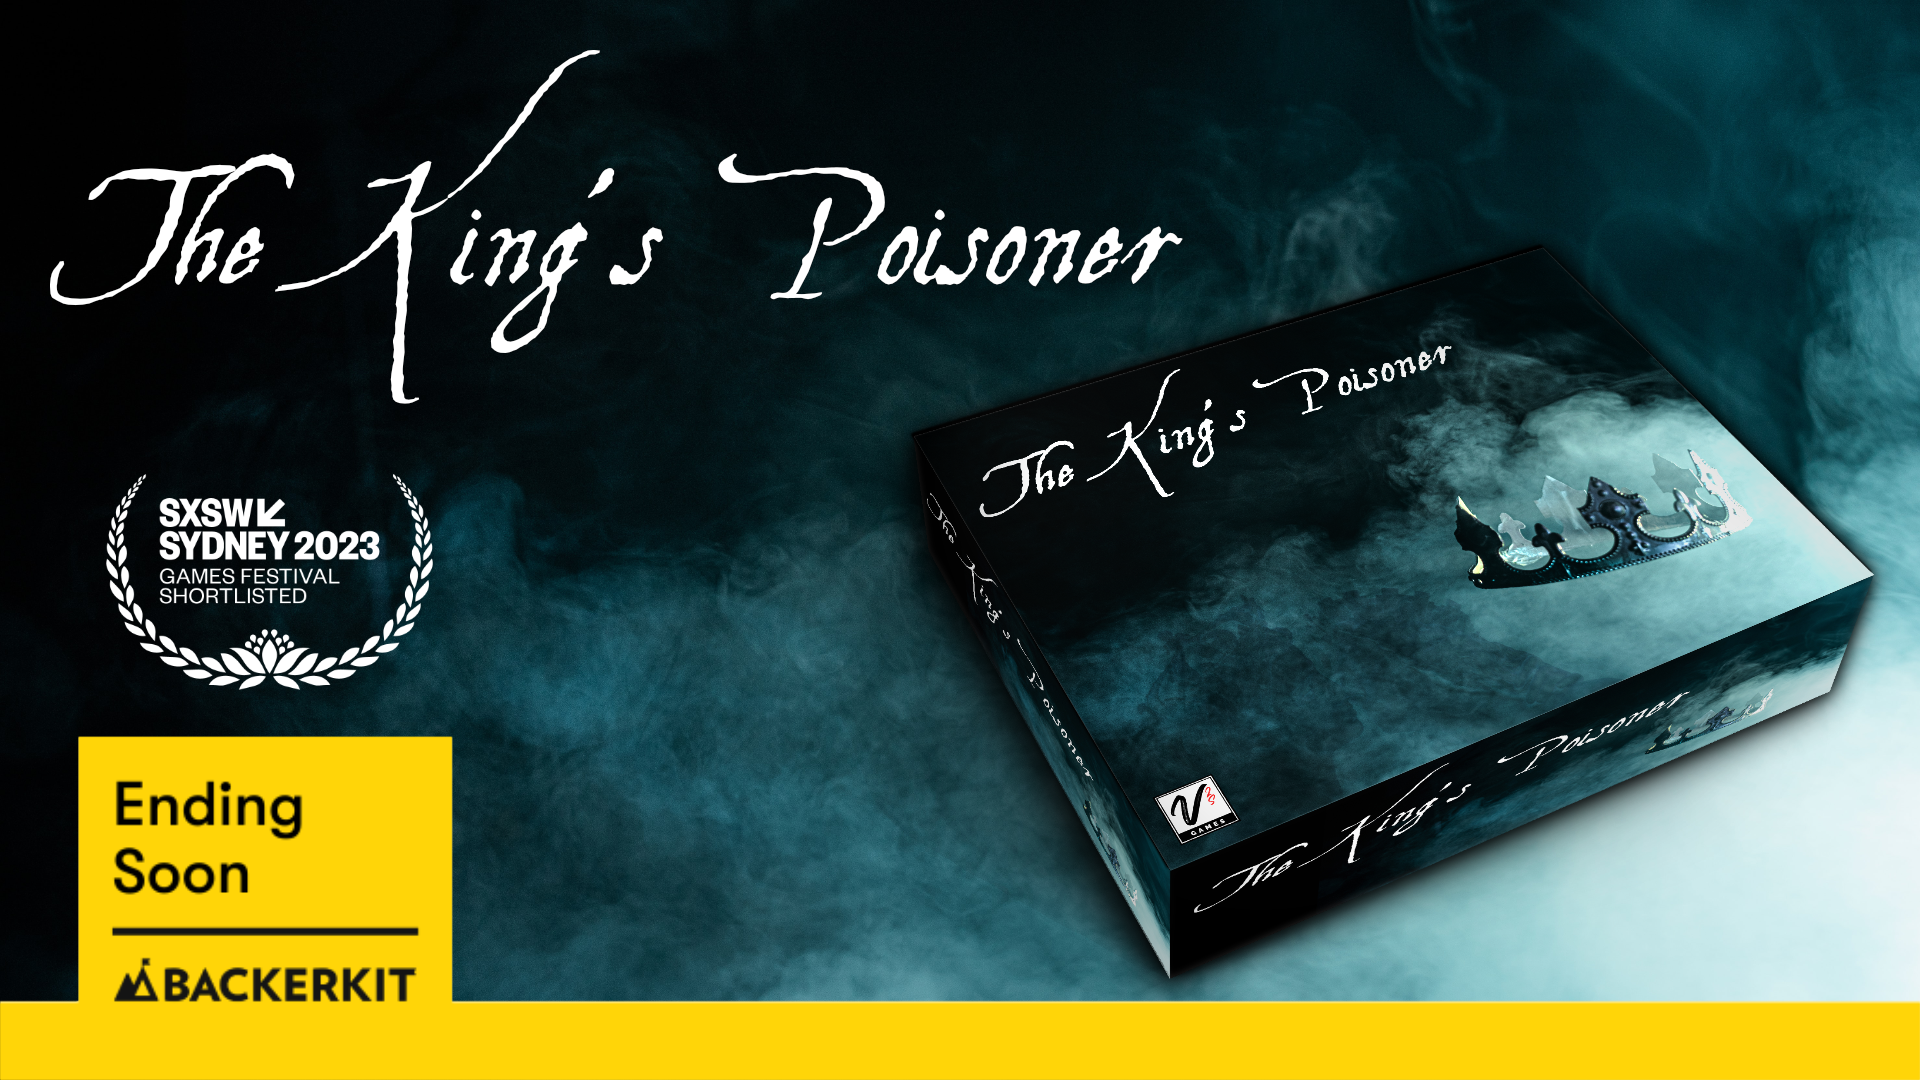 Last Days for The King’s Poisoner! Act Now, Before It’s Too Late!!